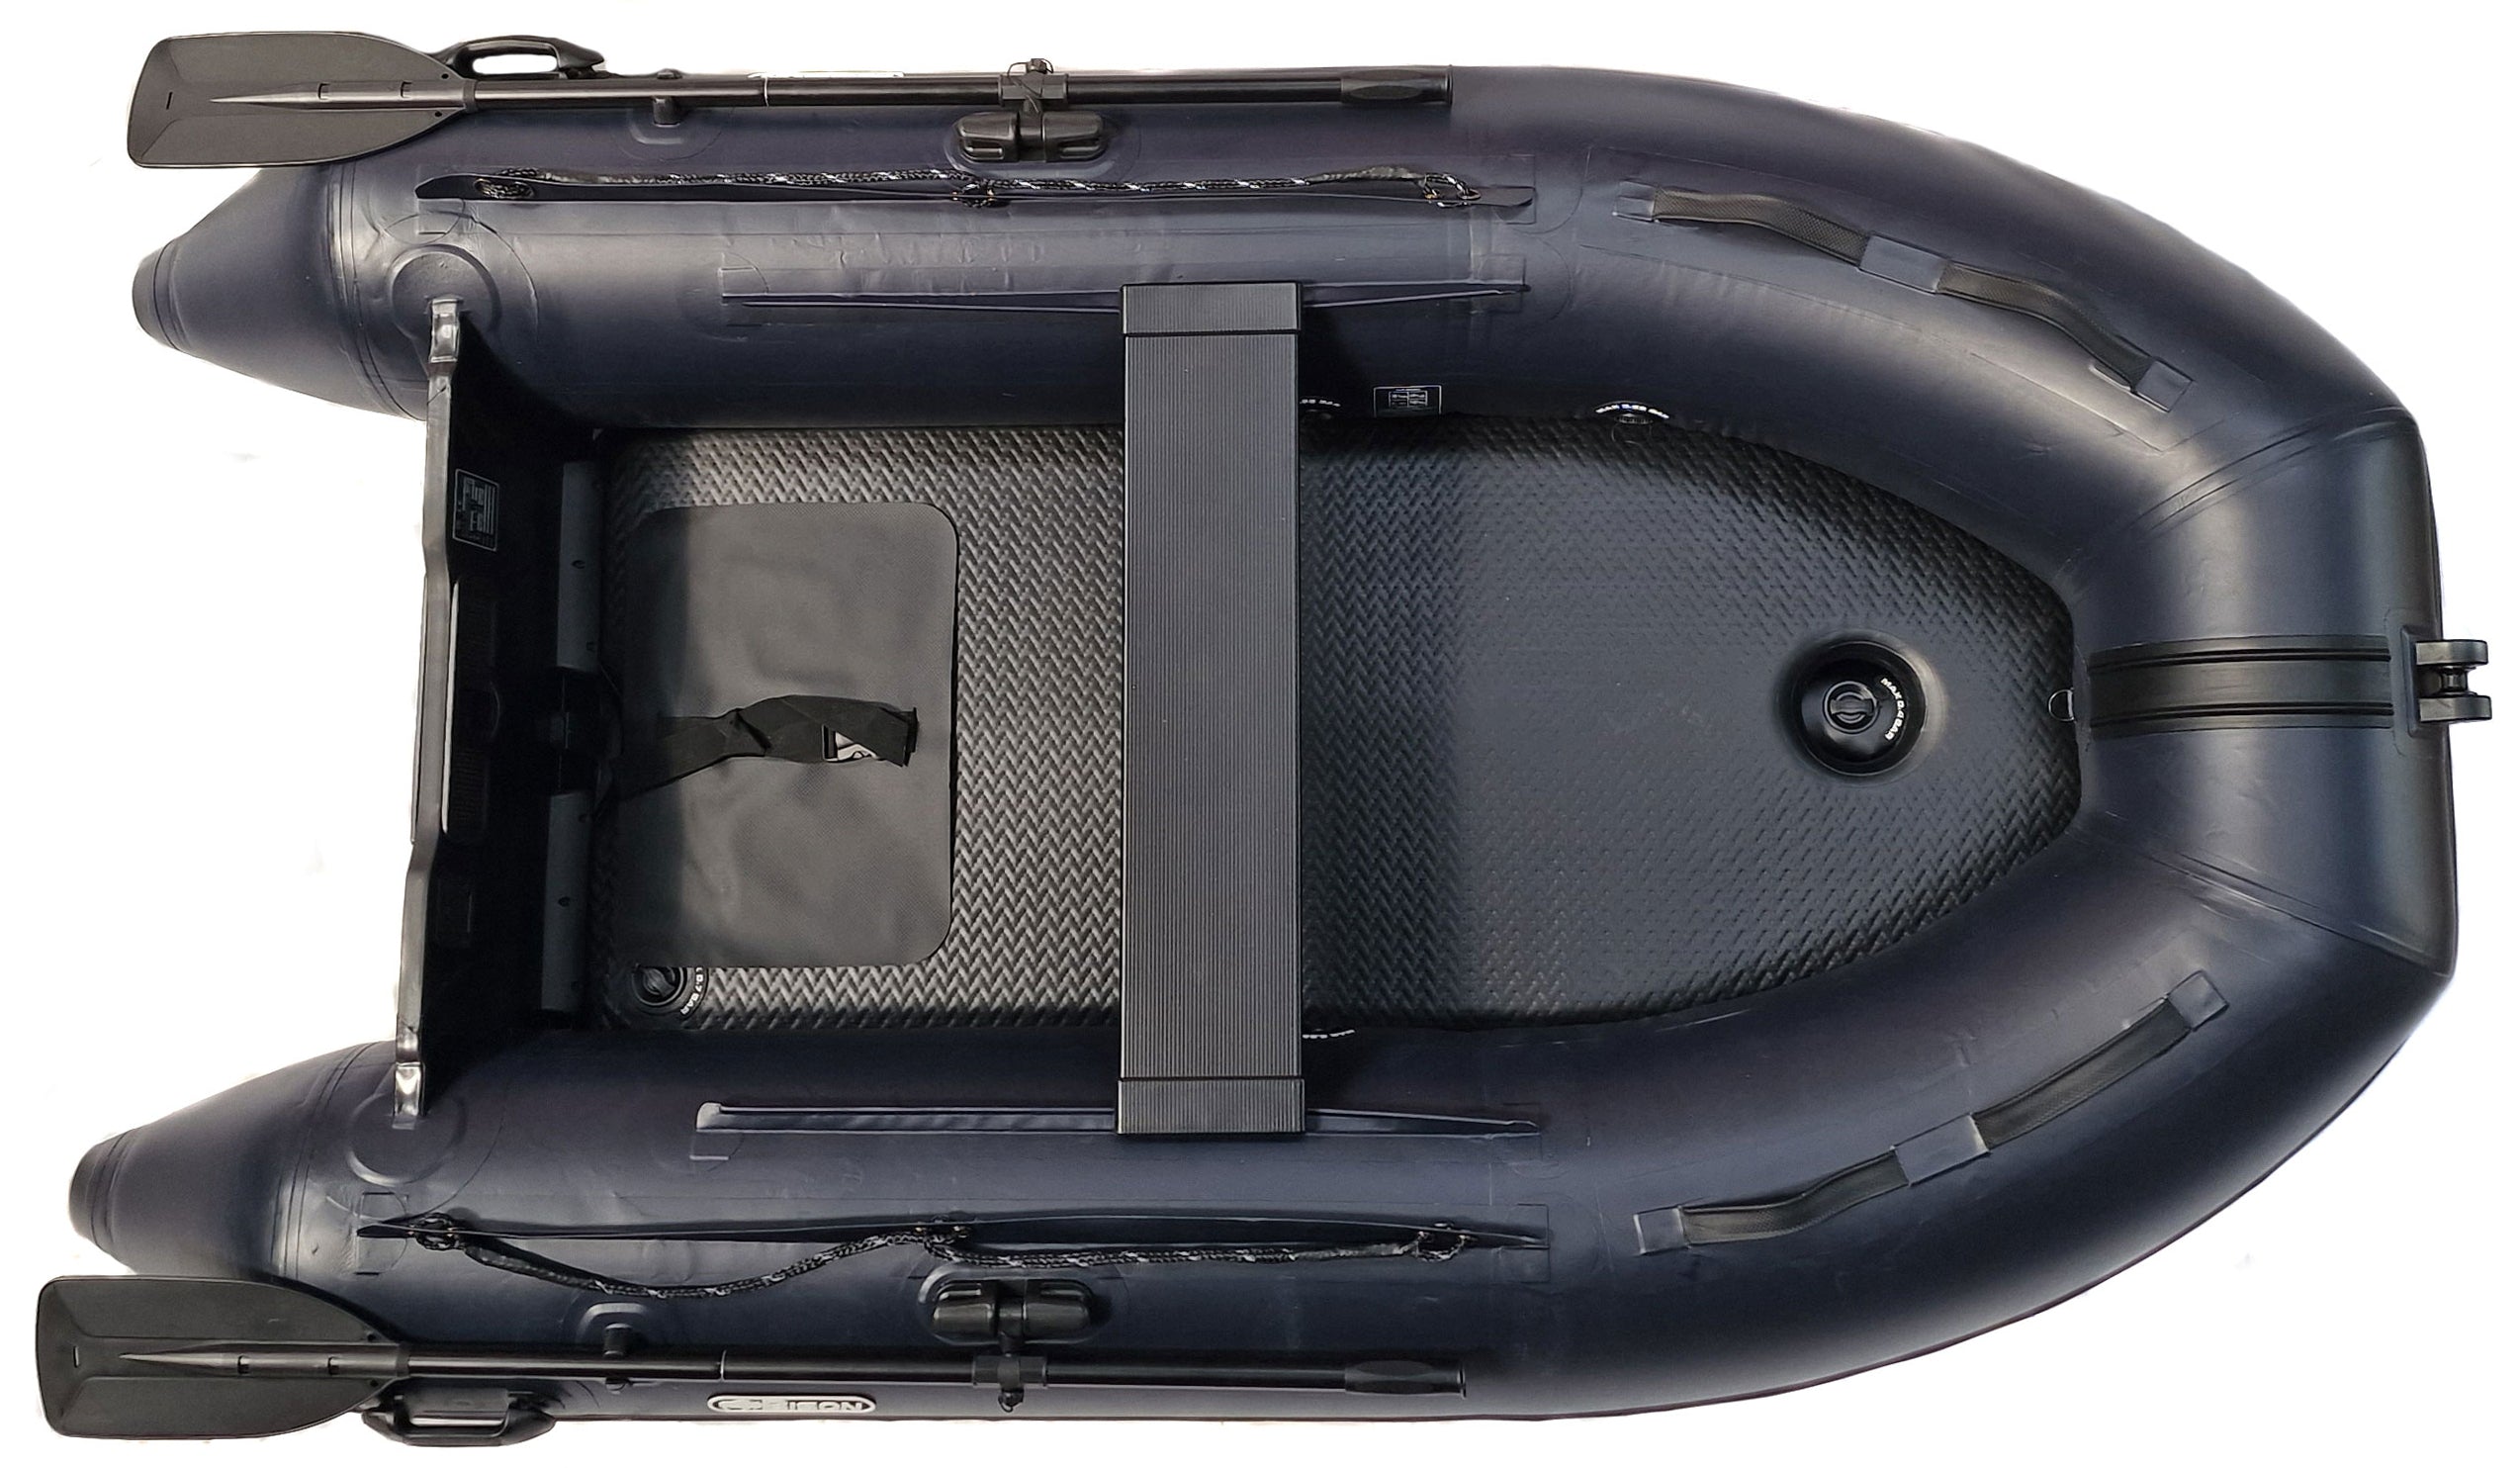 GYMAX Fishing Float Tube, 350lbs Inflatable Fishing Boat with